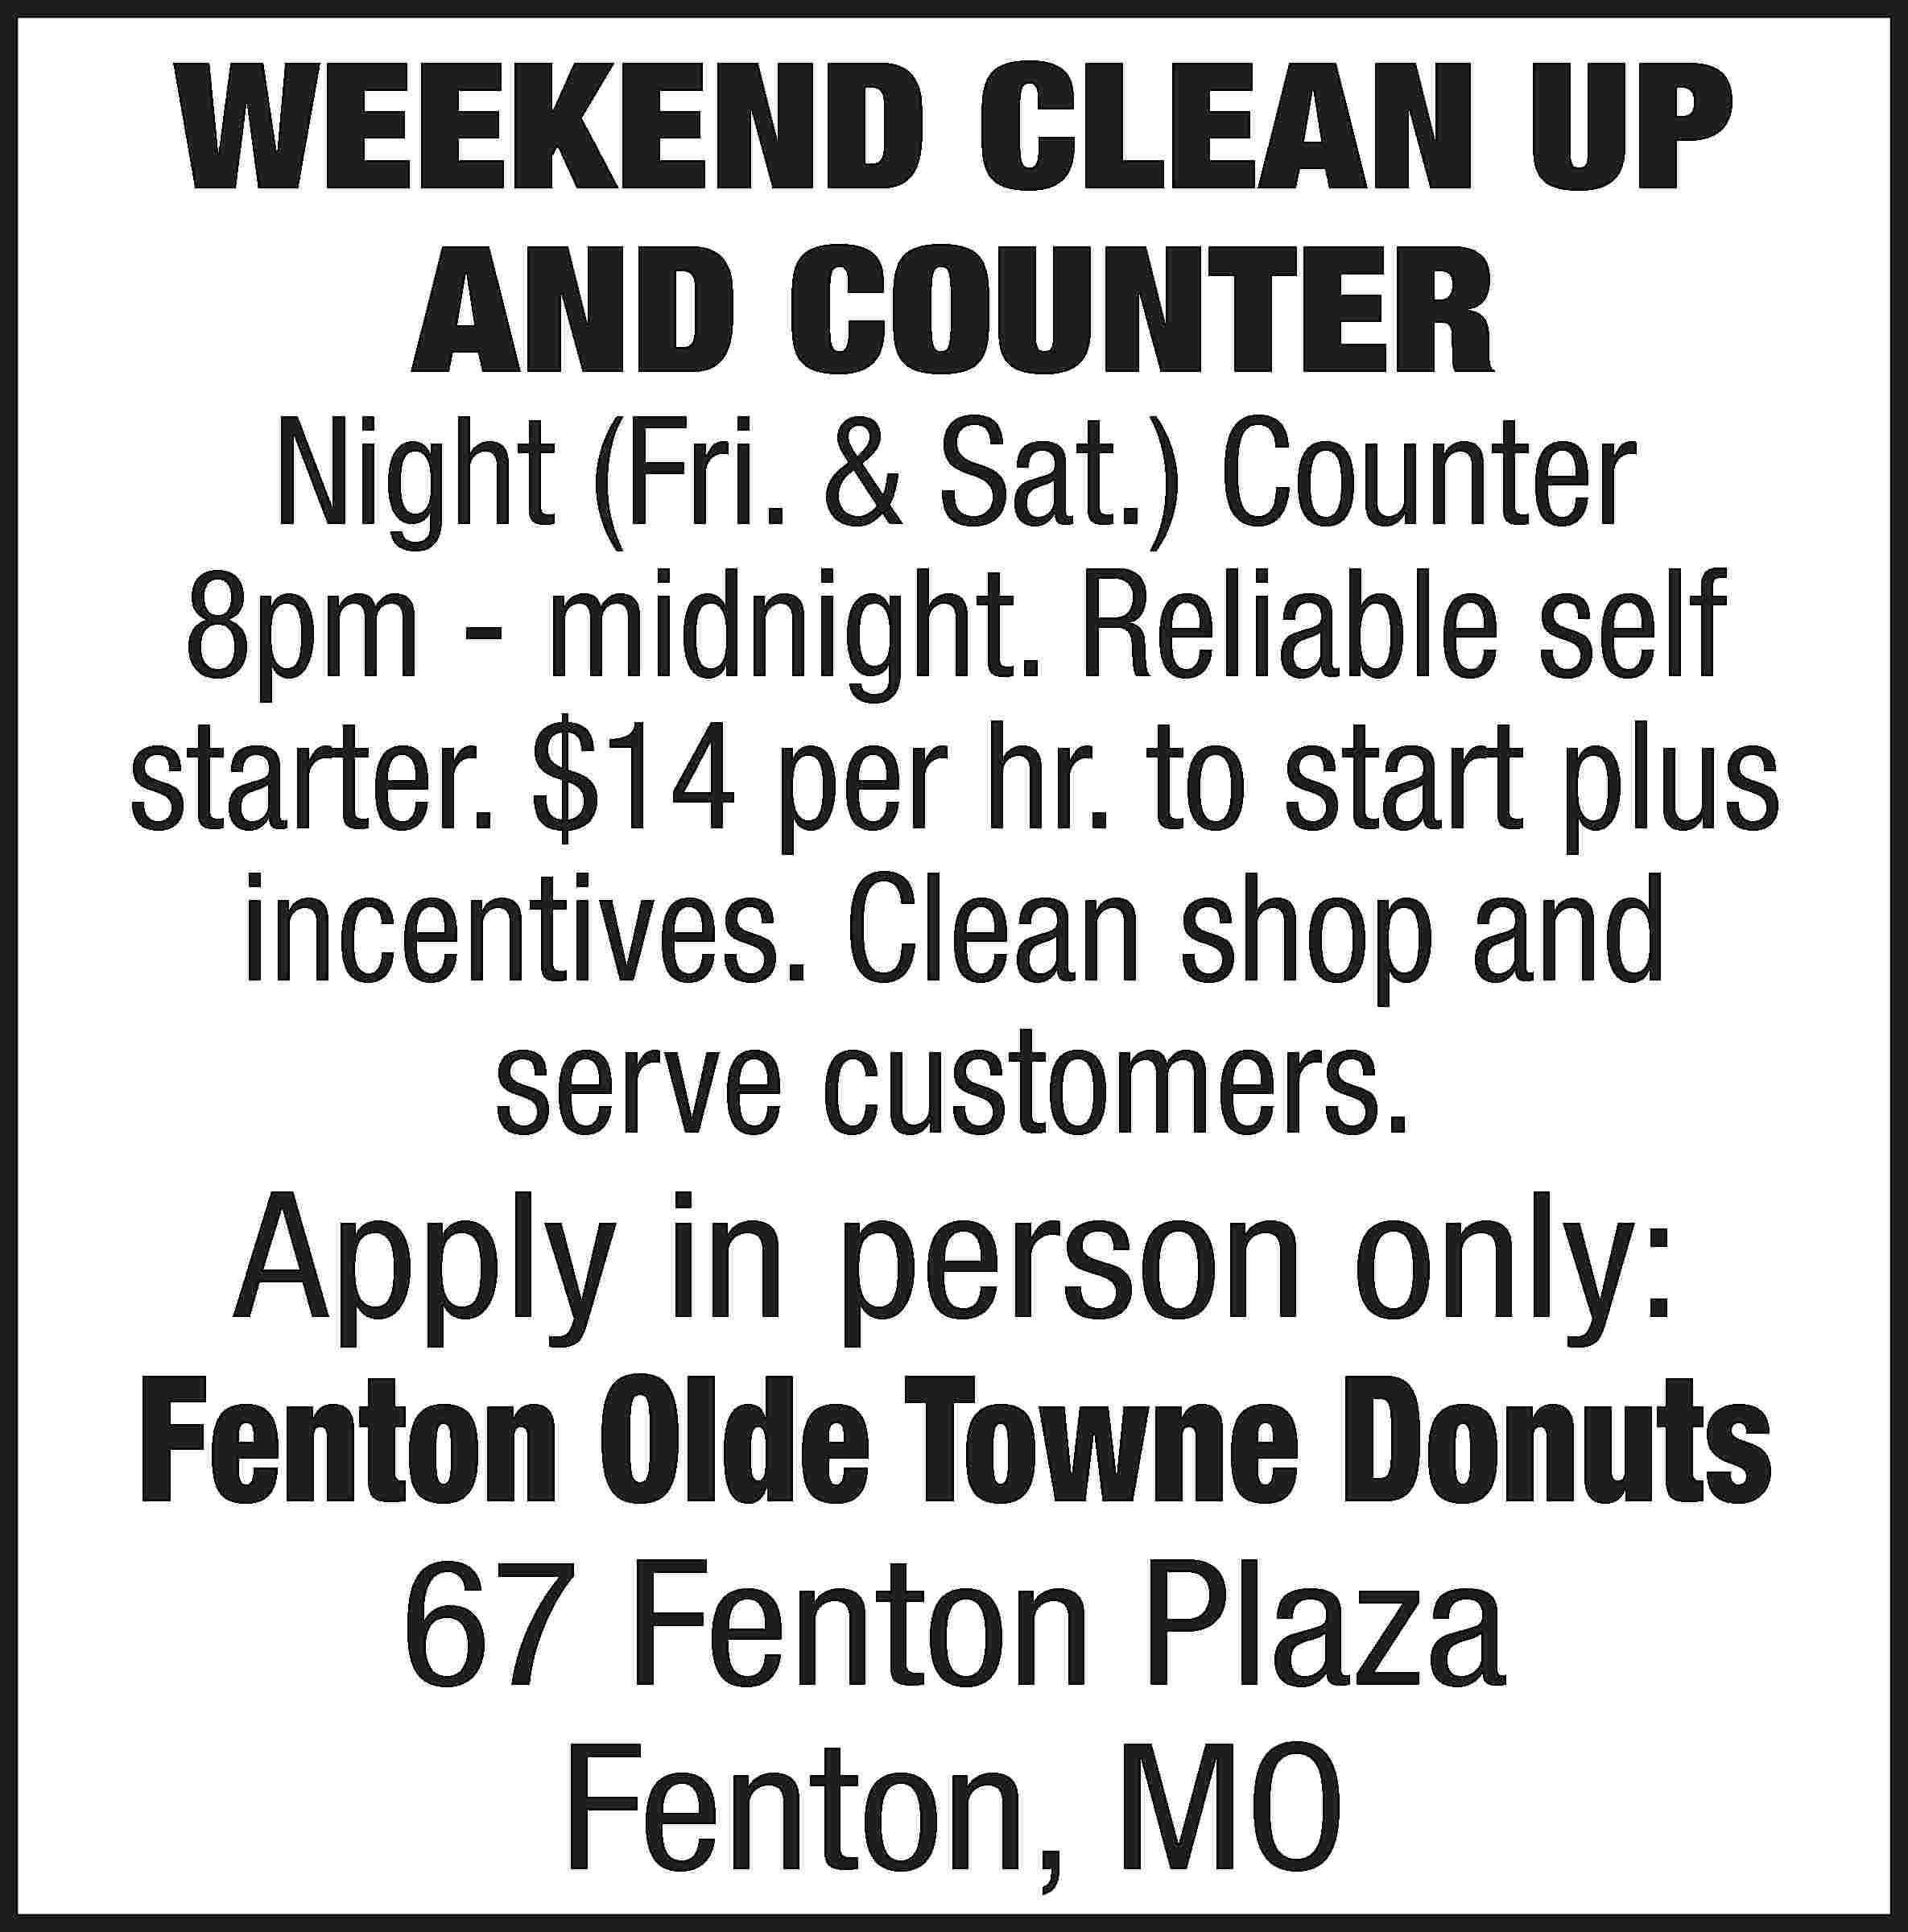 WEEKEND CLEAN UP AND COUNTER  WEEKEND CLEAN UP AND COUNTER Night (Fri. & Sat.) Counter 8pm - midnight. Reliable self starter. $14 per hr. to start plus incentives. Clean shop and serve customers. Apply in person only: Fenton Olde Towne Donuts 67 Fenton Plaza Fenton, MO